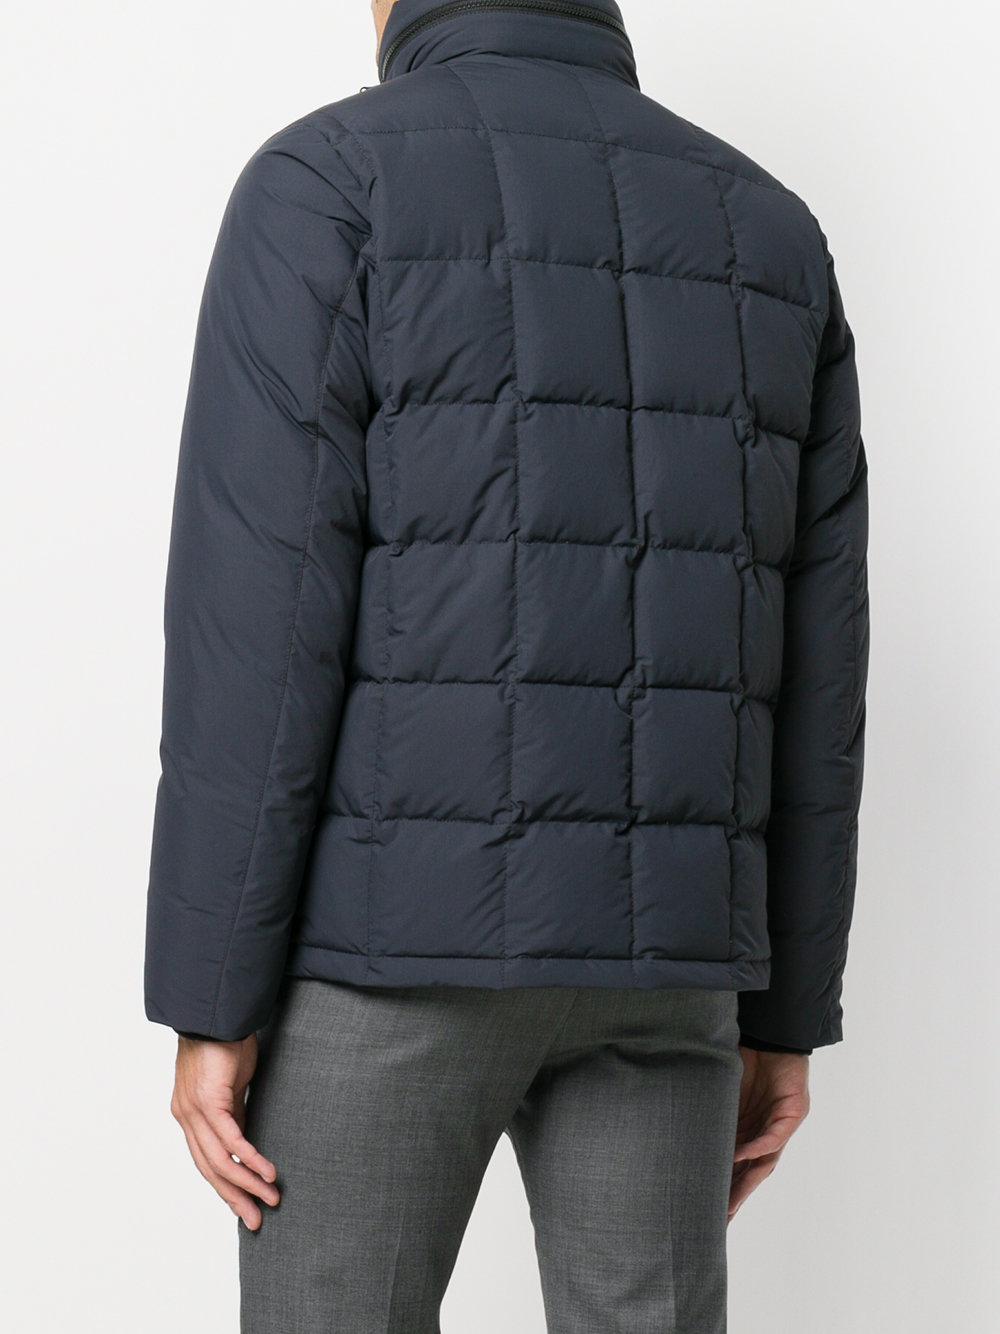 Lyst - Aspesi Square Quilted Puffer Jacket in Blue for Men